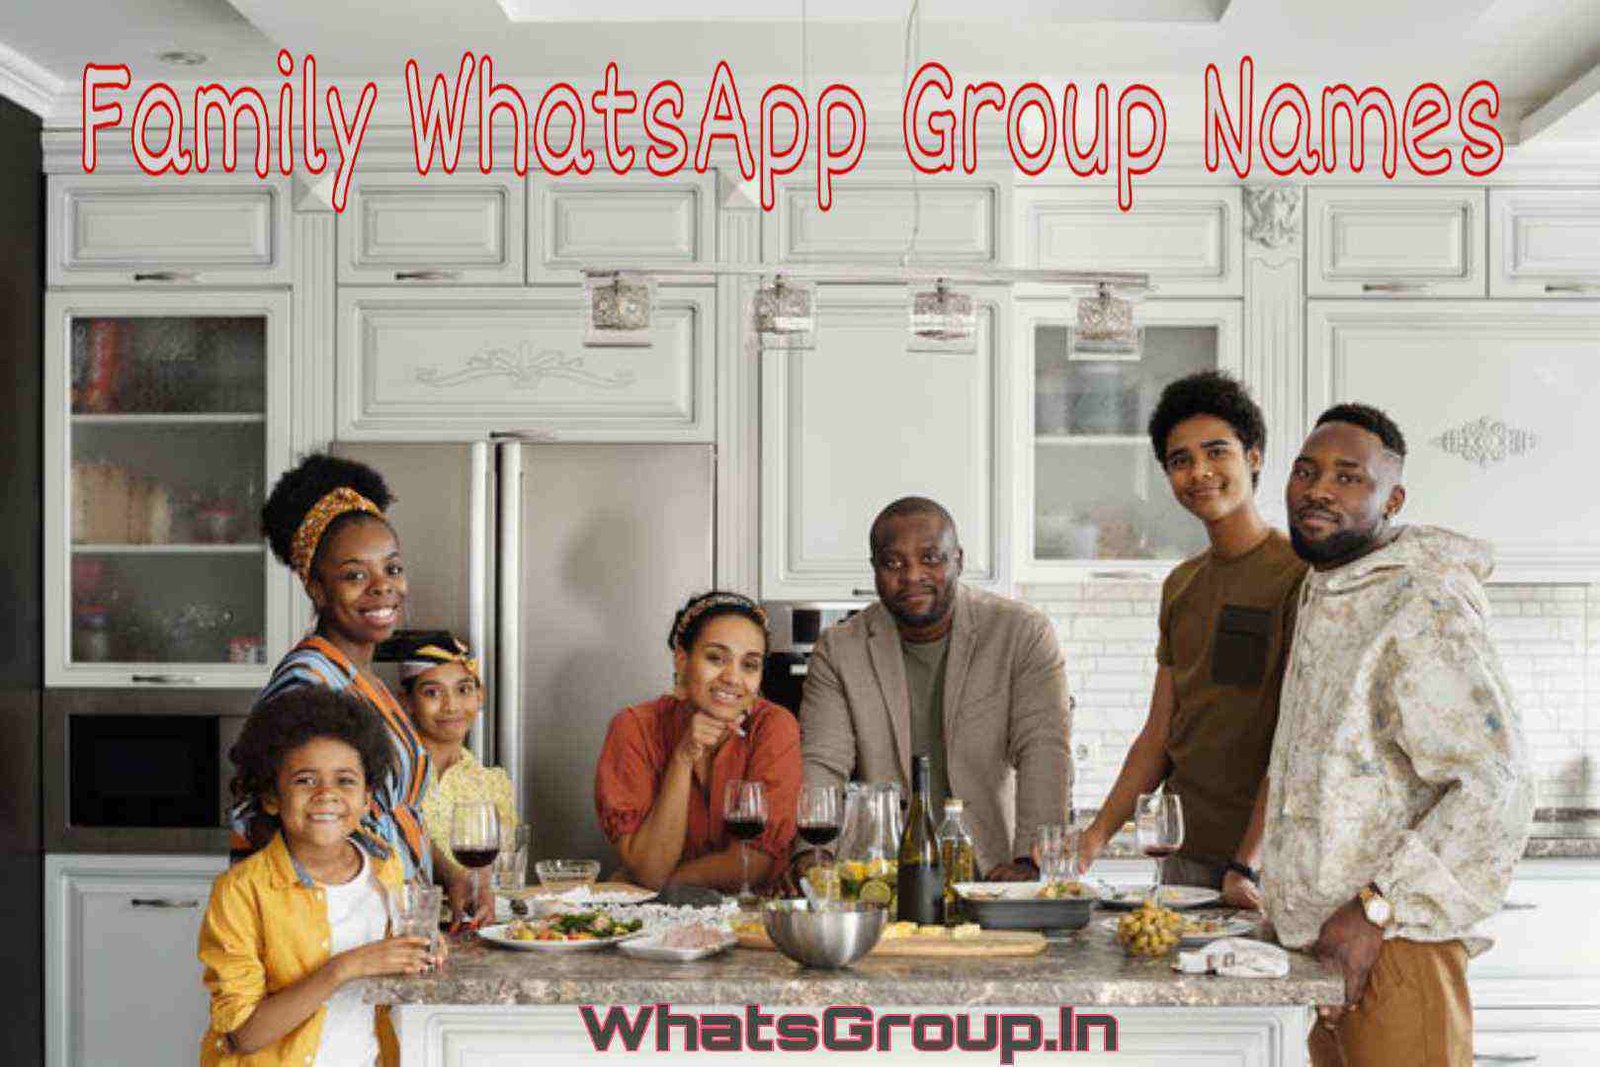 WhatsApp Group Names for Family